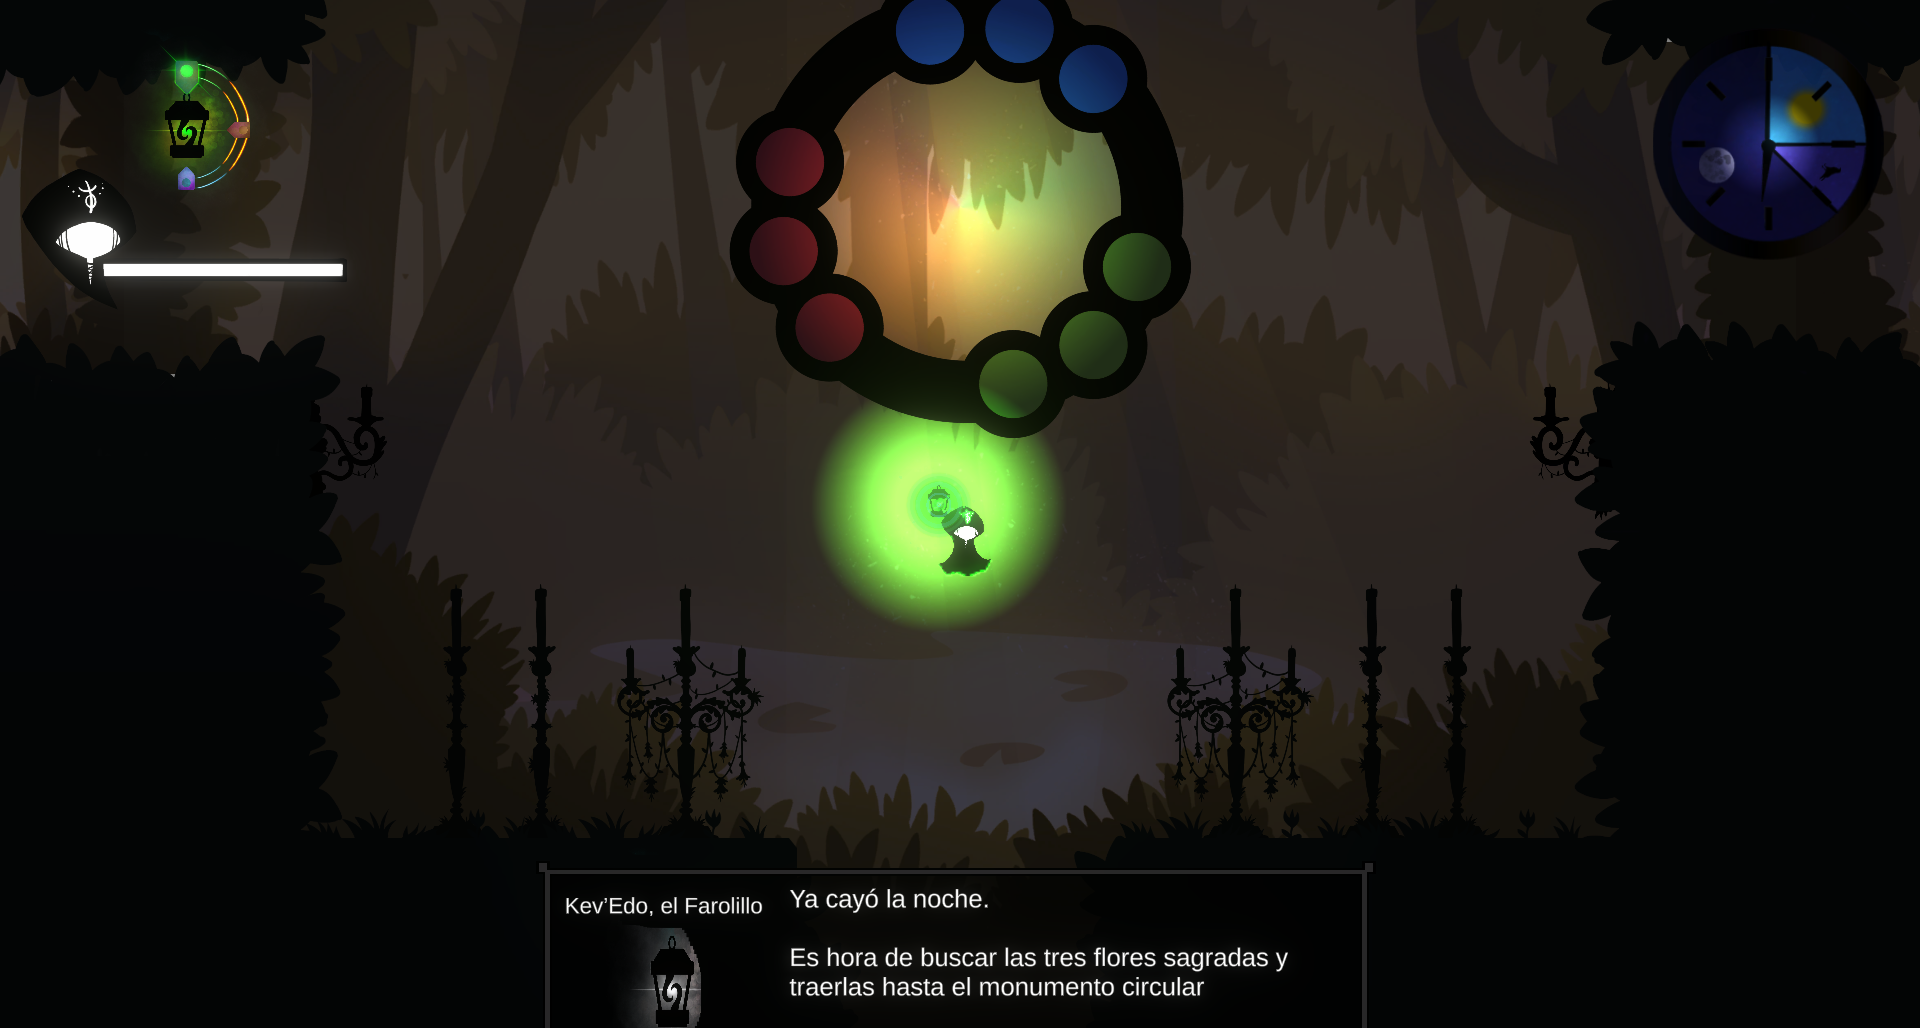 Gameplay screenshot that pretends to show the UI